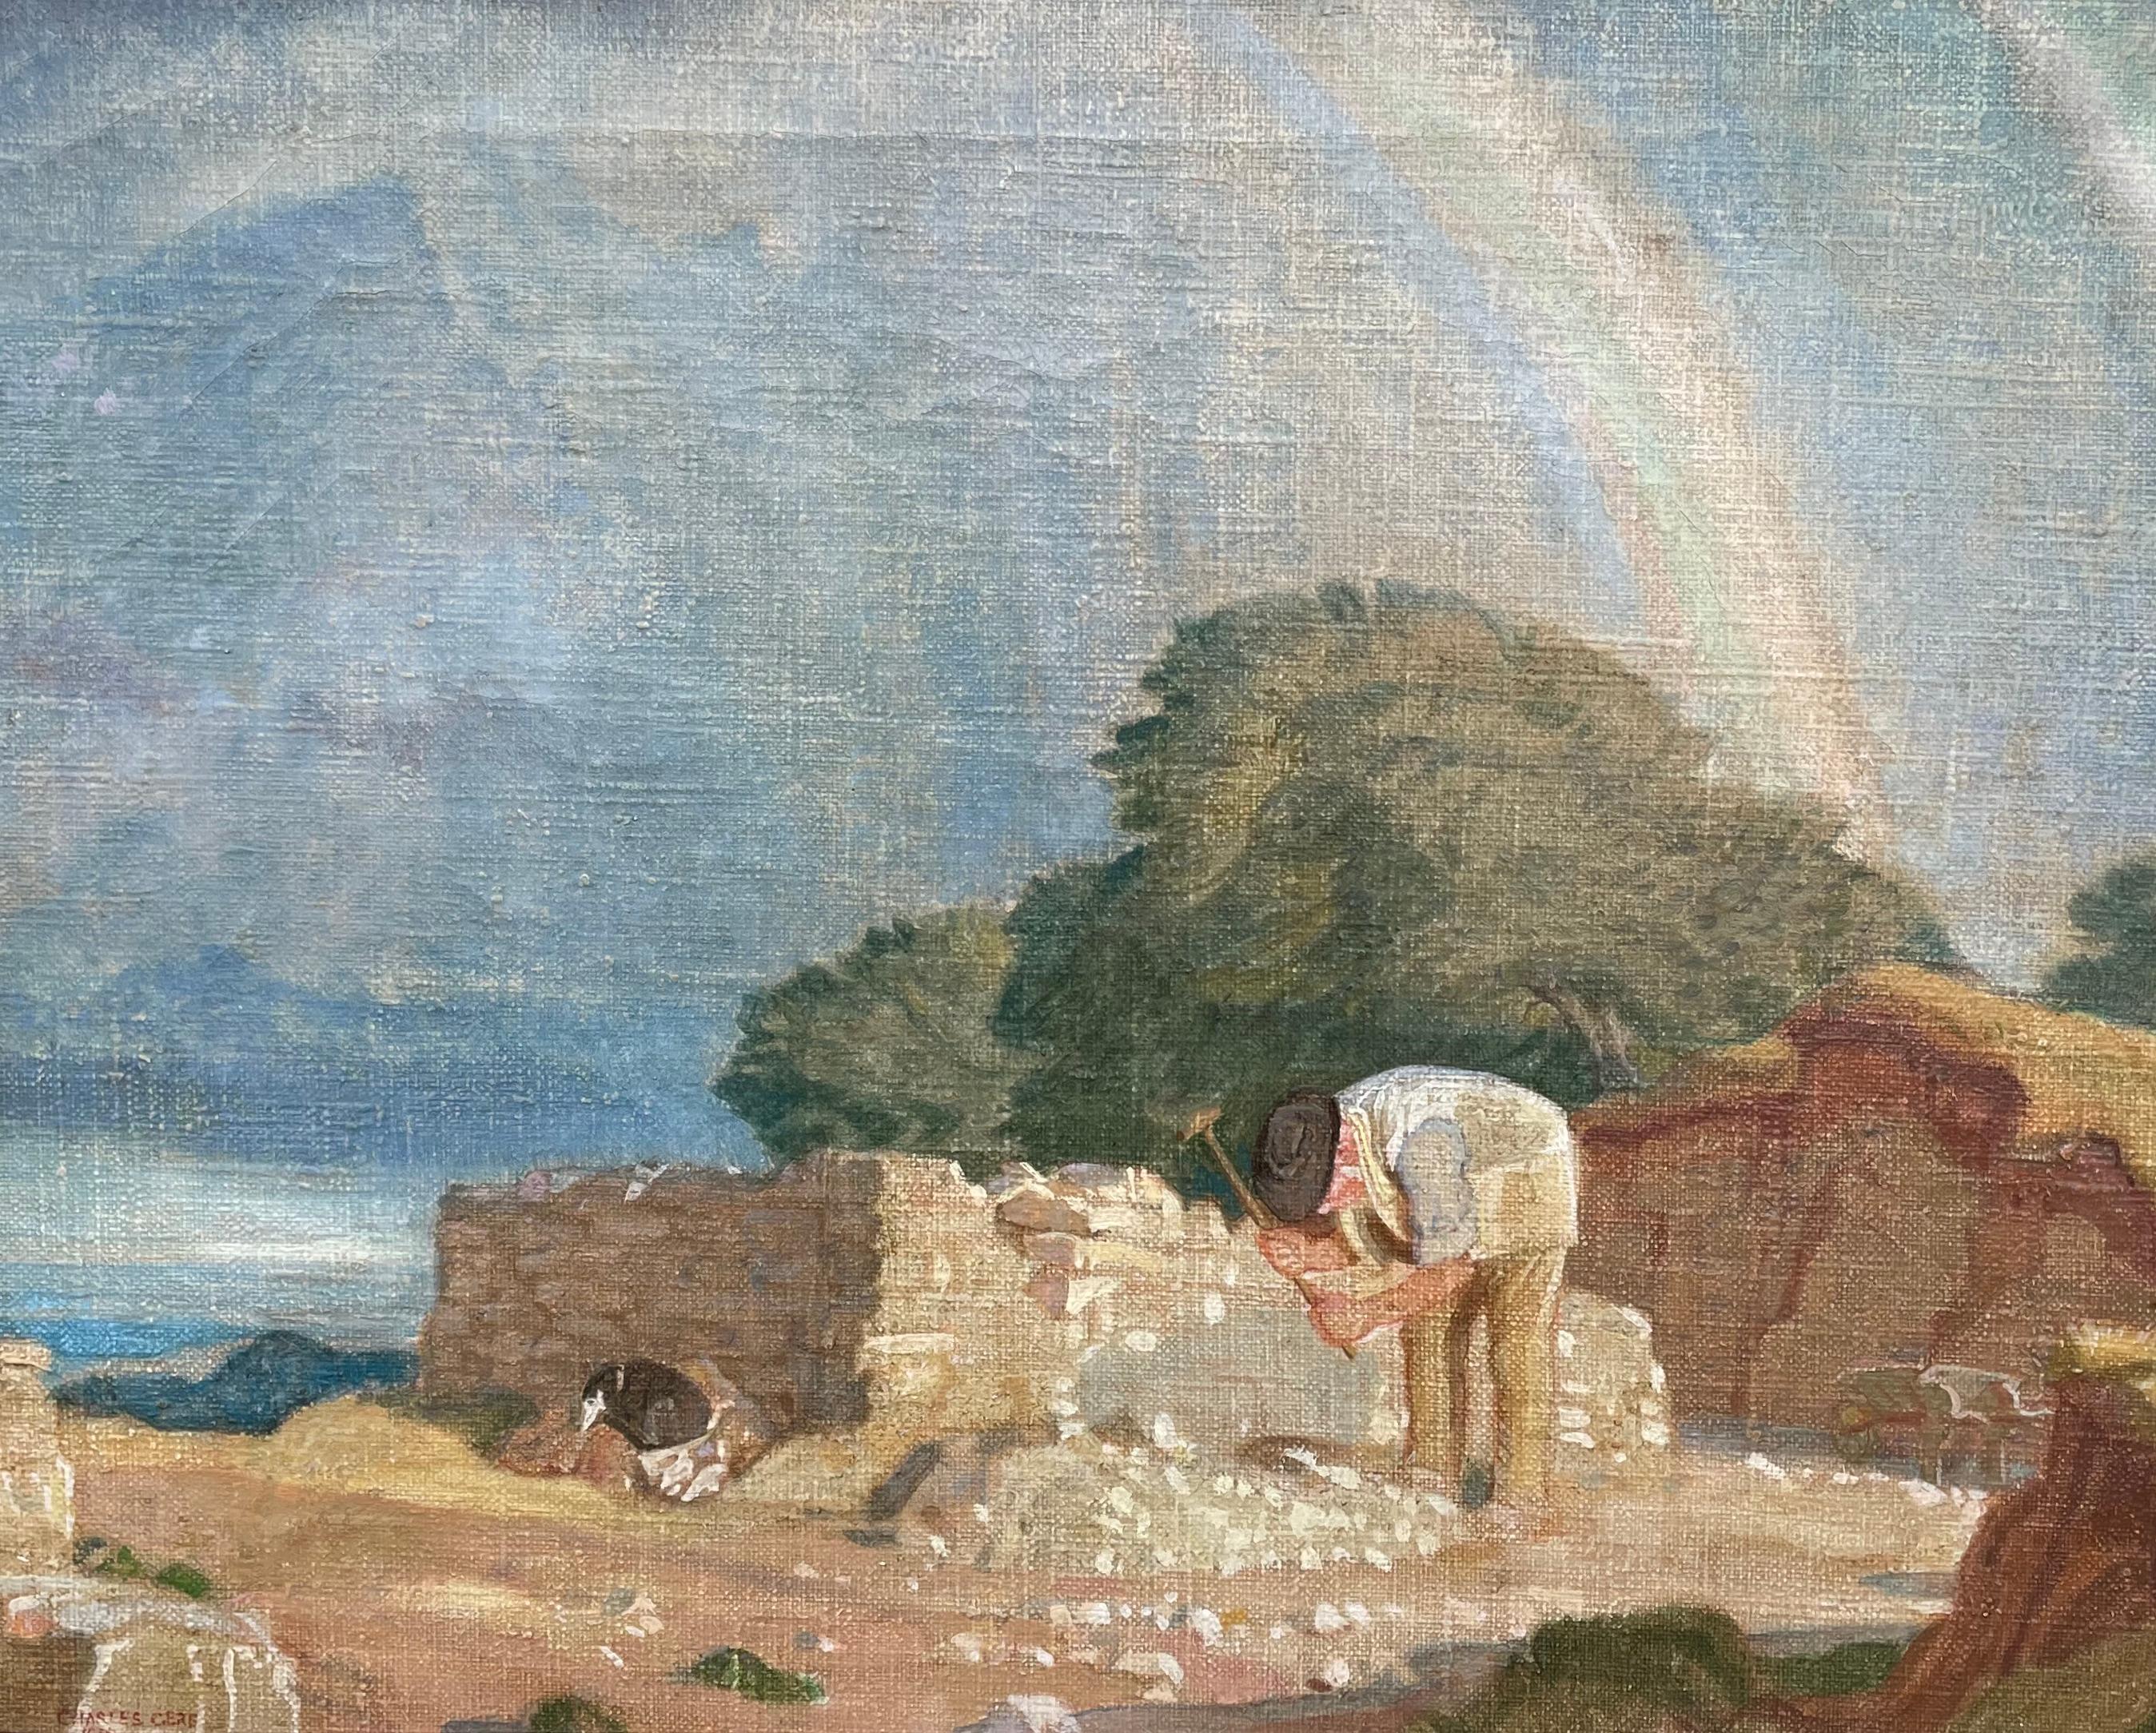 A Cotswold Stonebreaker - Charles March Gere - Early 20th Century British Oil - Painting by Charles March Gere, RA, RWS